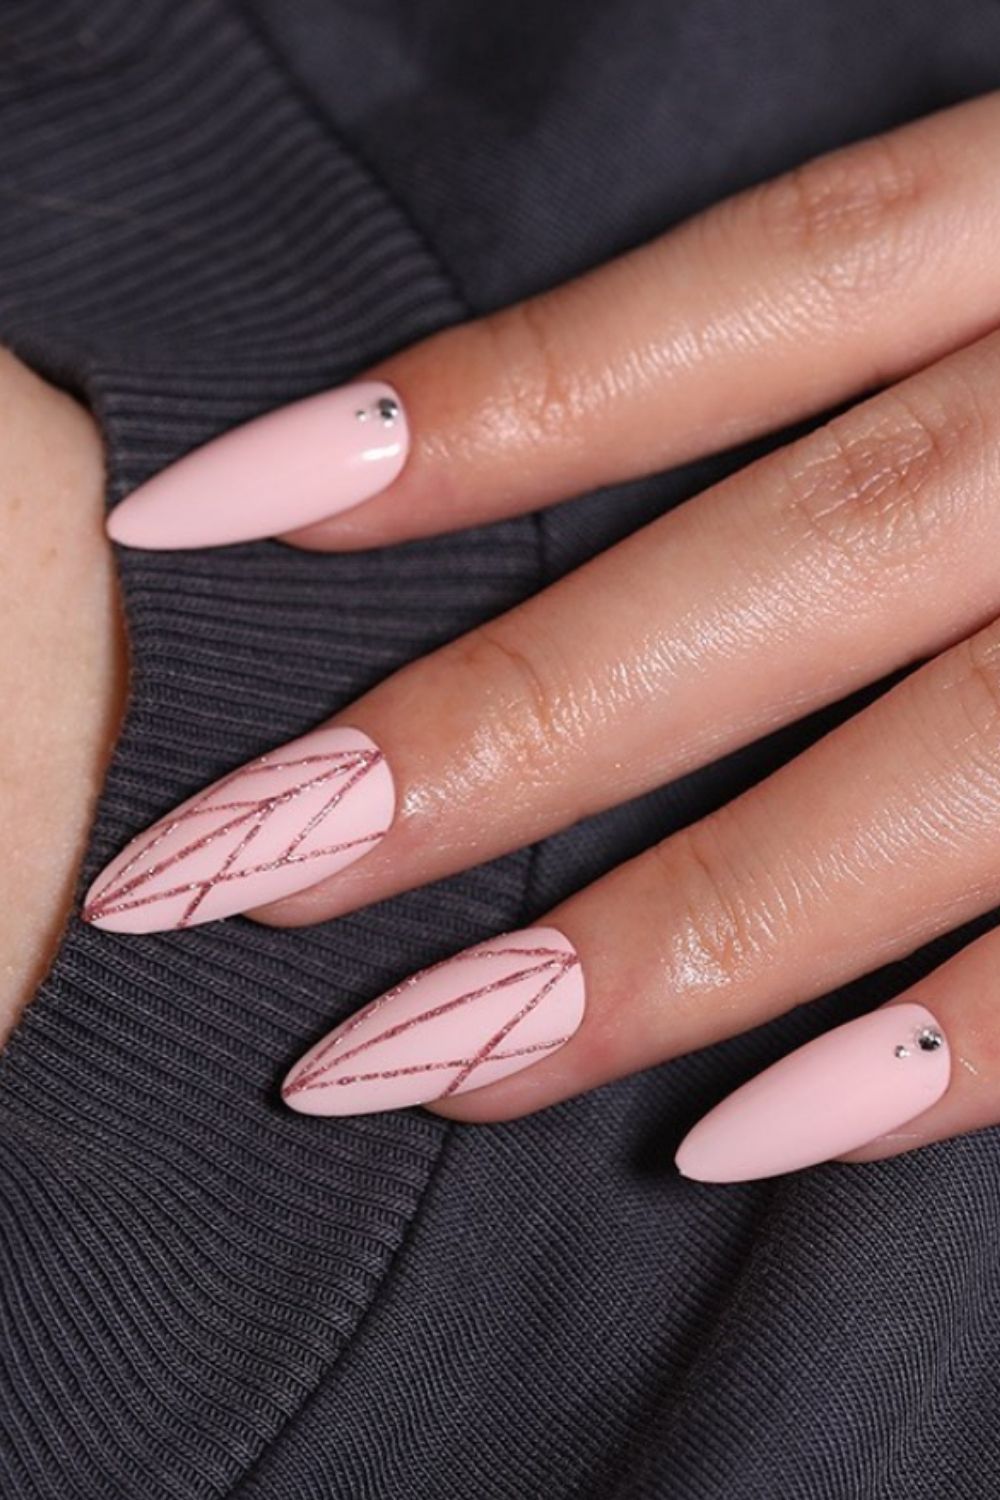 Pink and glitter almond shaped nails